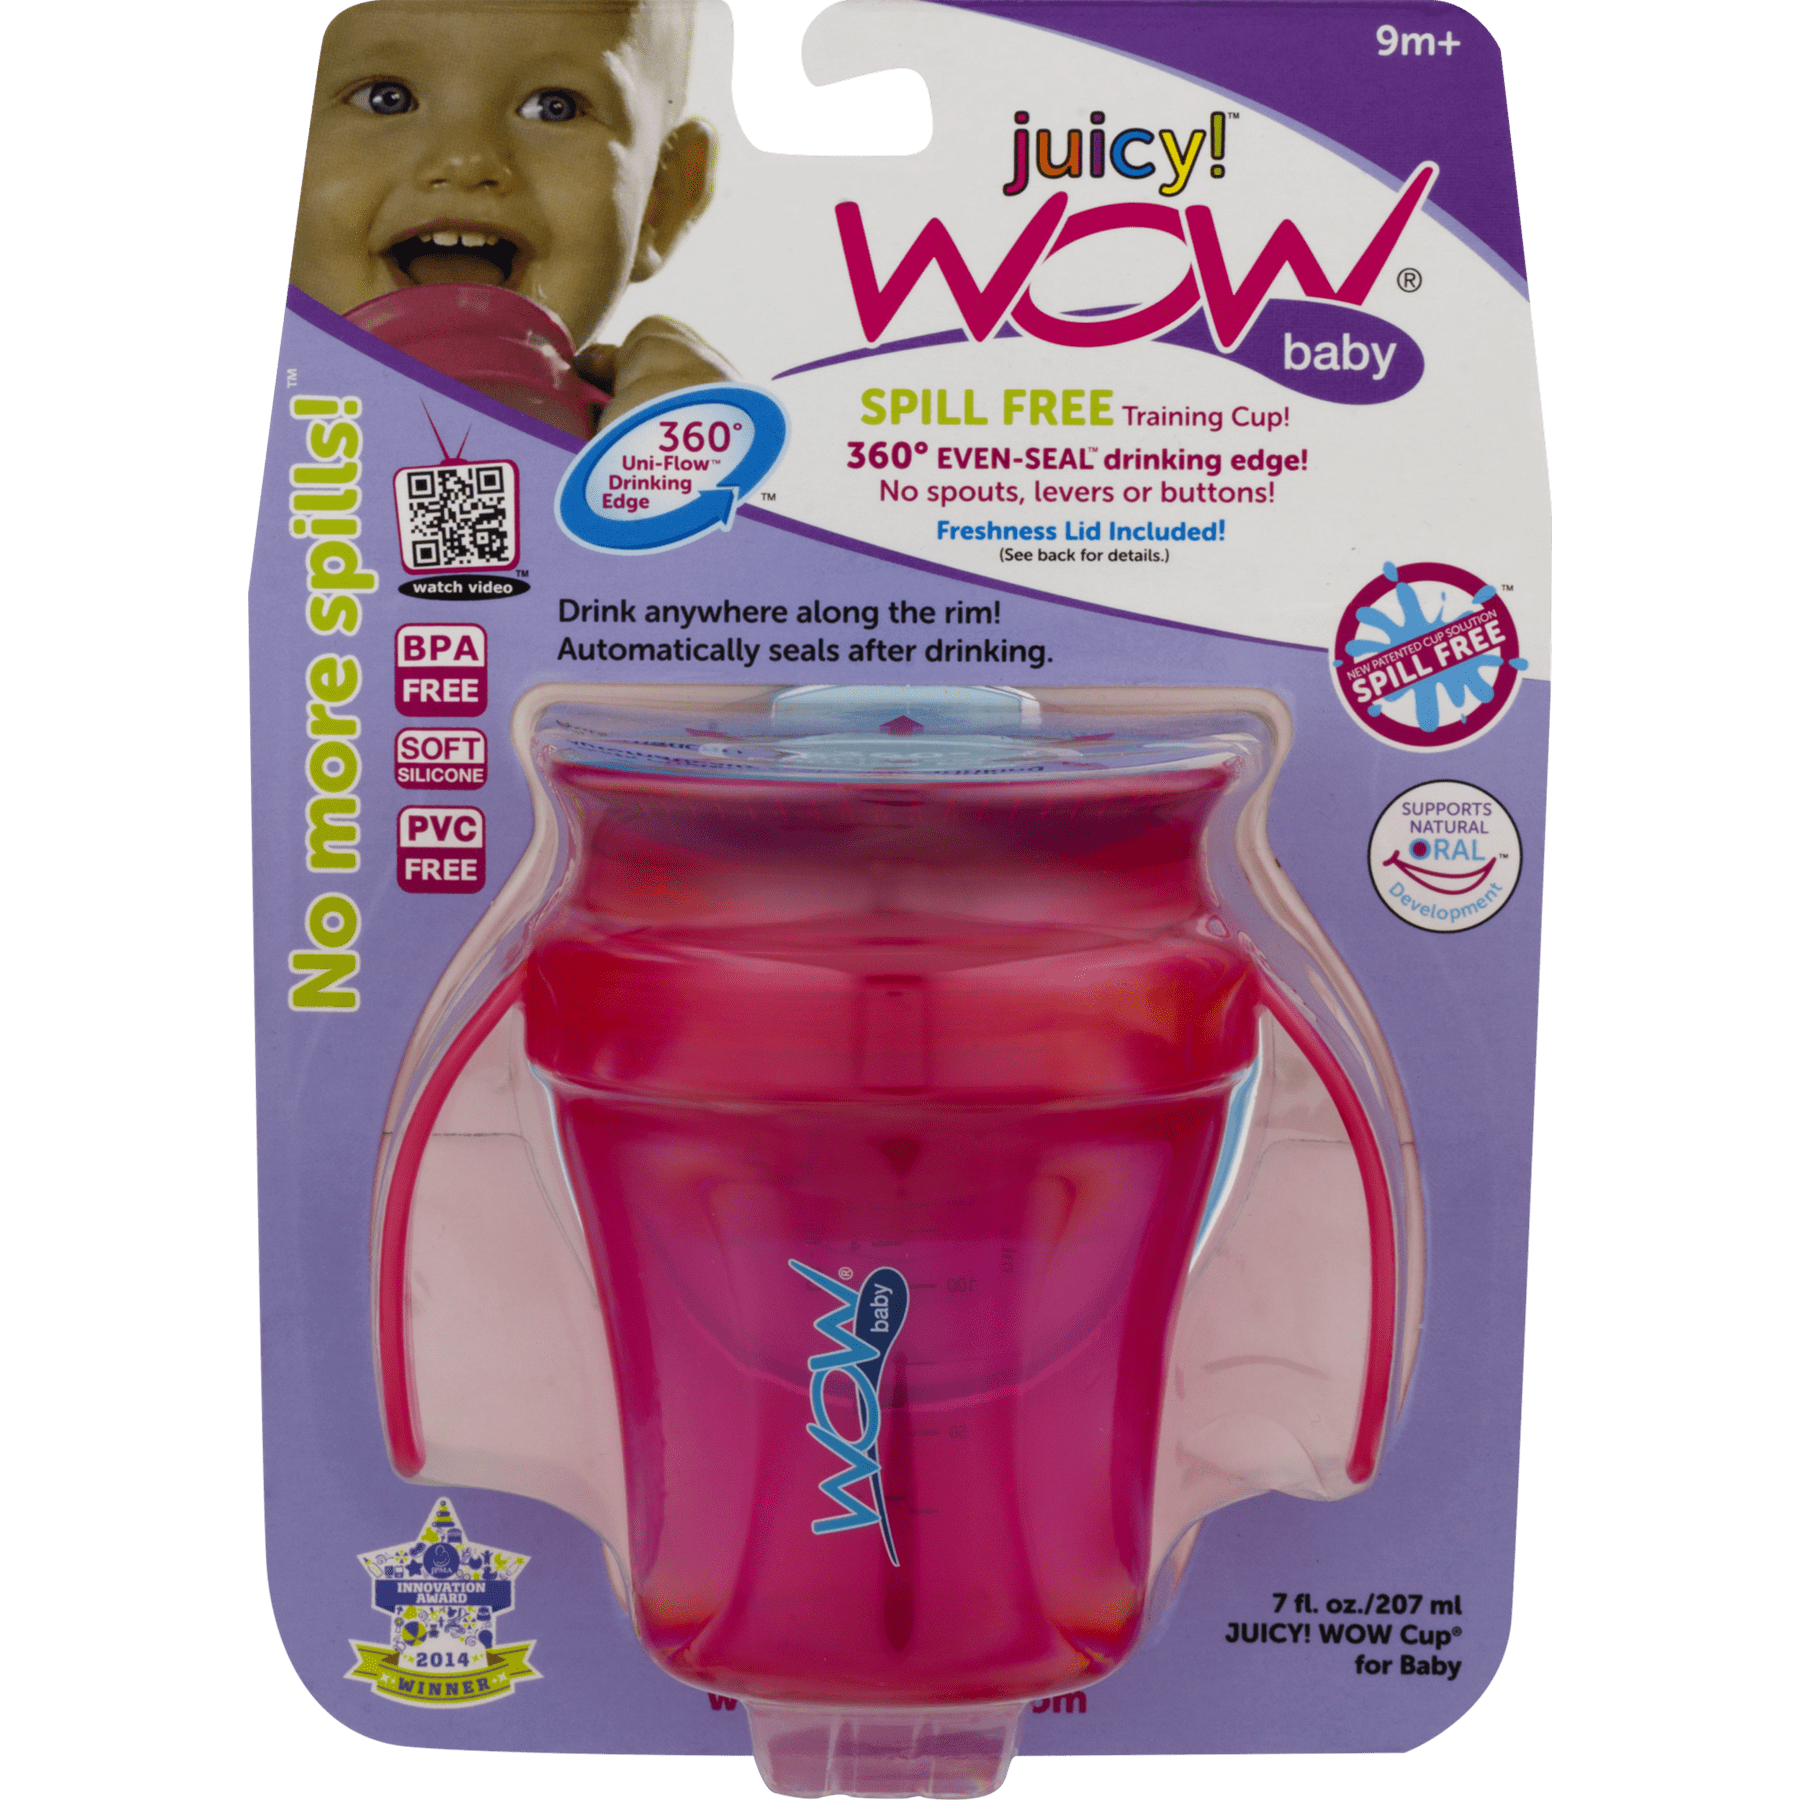 WOW CUP for Kids 360 Drinking Cup - Blue, 10 oz. /296 ml - WOW GEAR